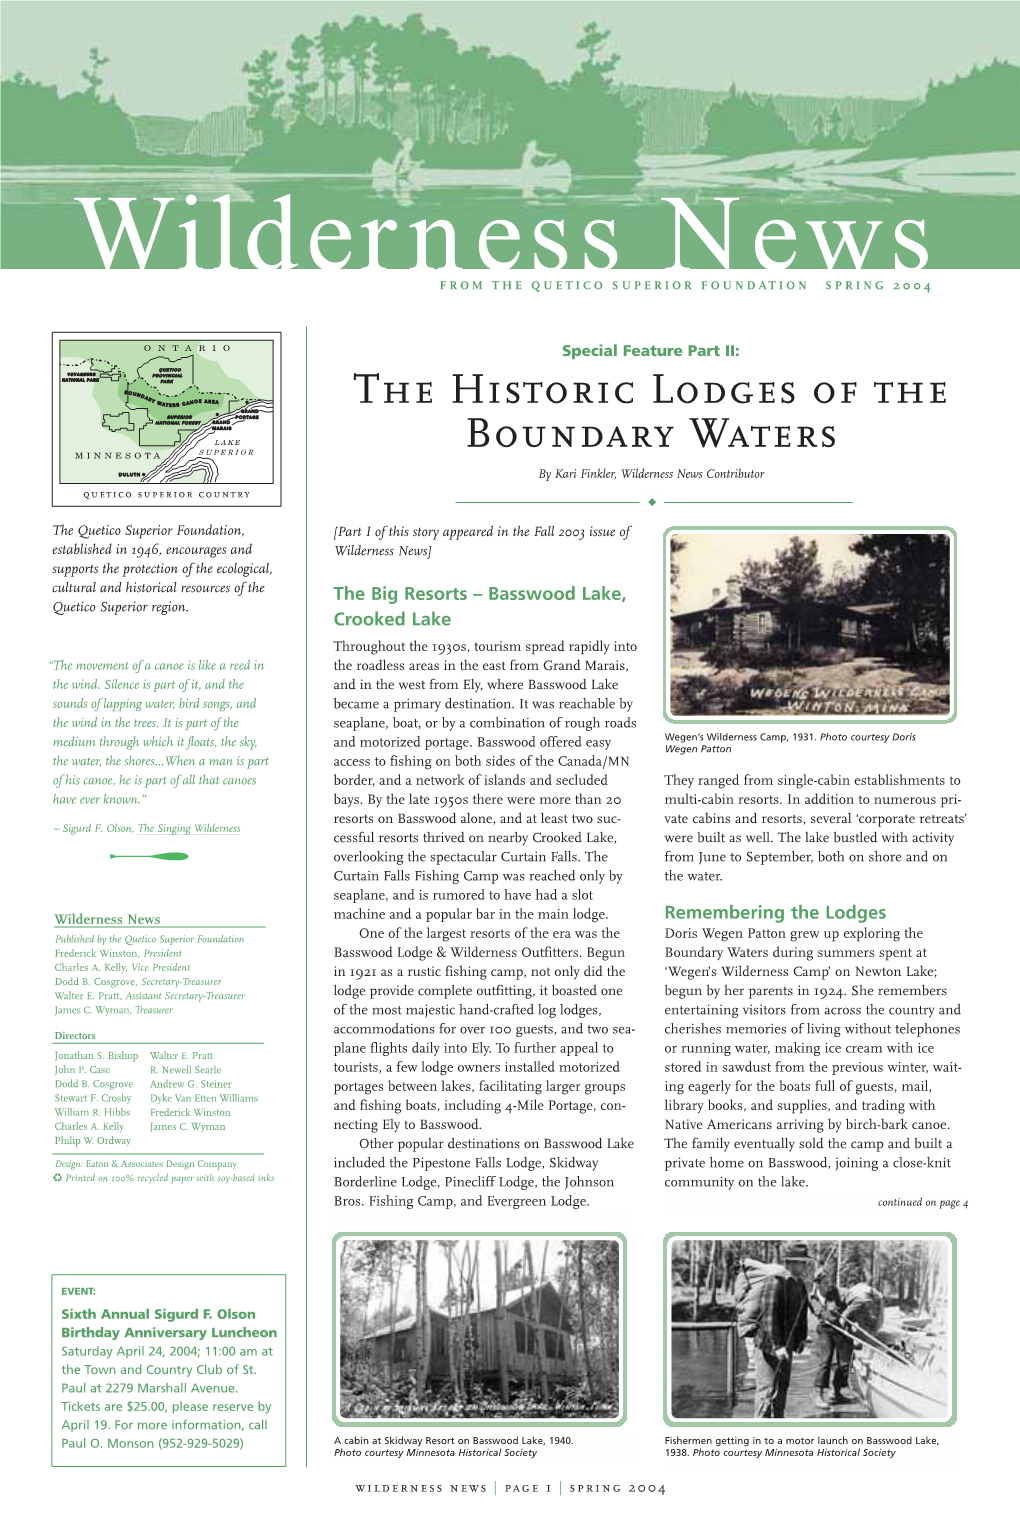 The Historic Lodges of the Boundary Waters